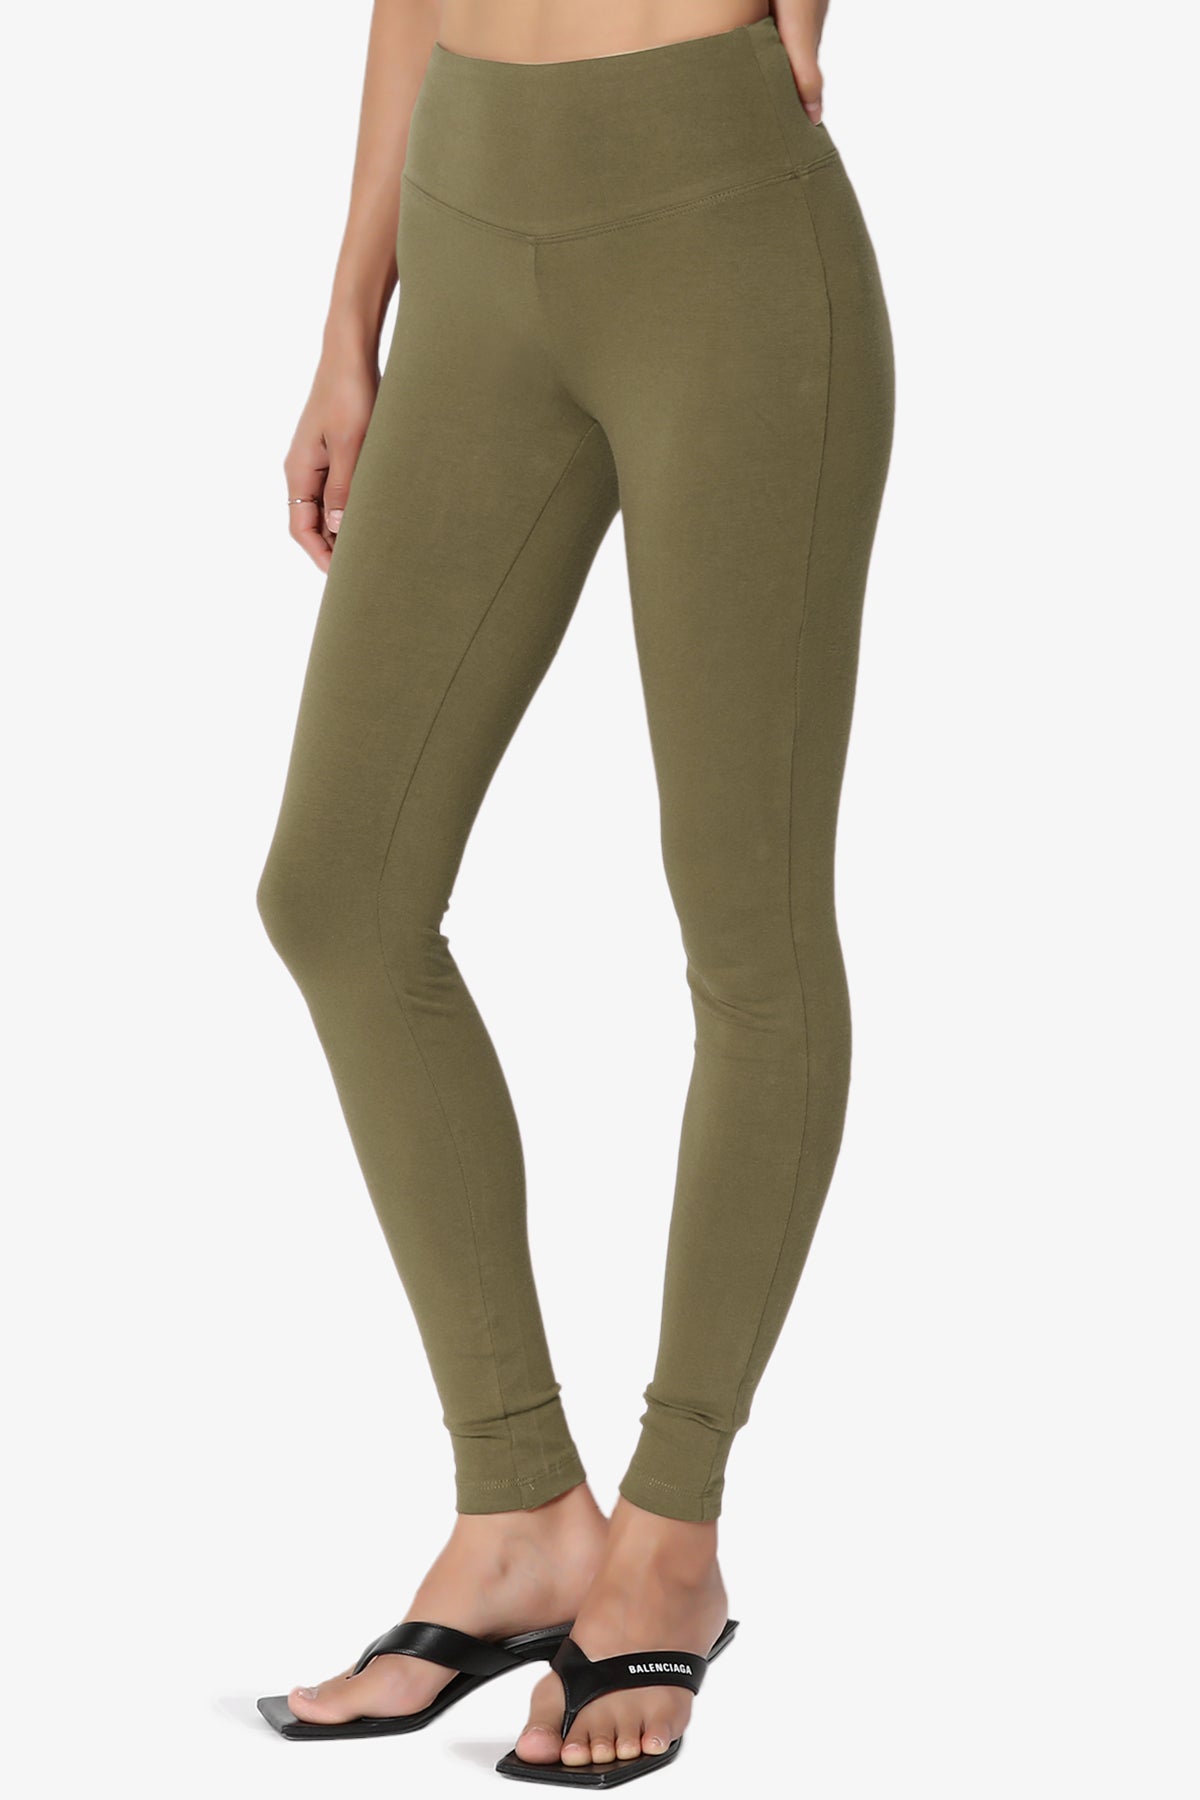 Ansley Cotton Wide Waistband Ankle Leggings PLUS MORE COLORS